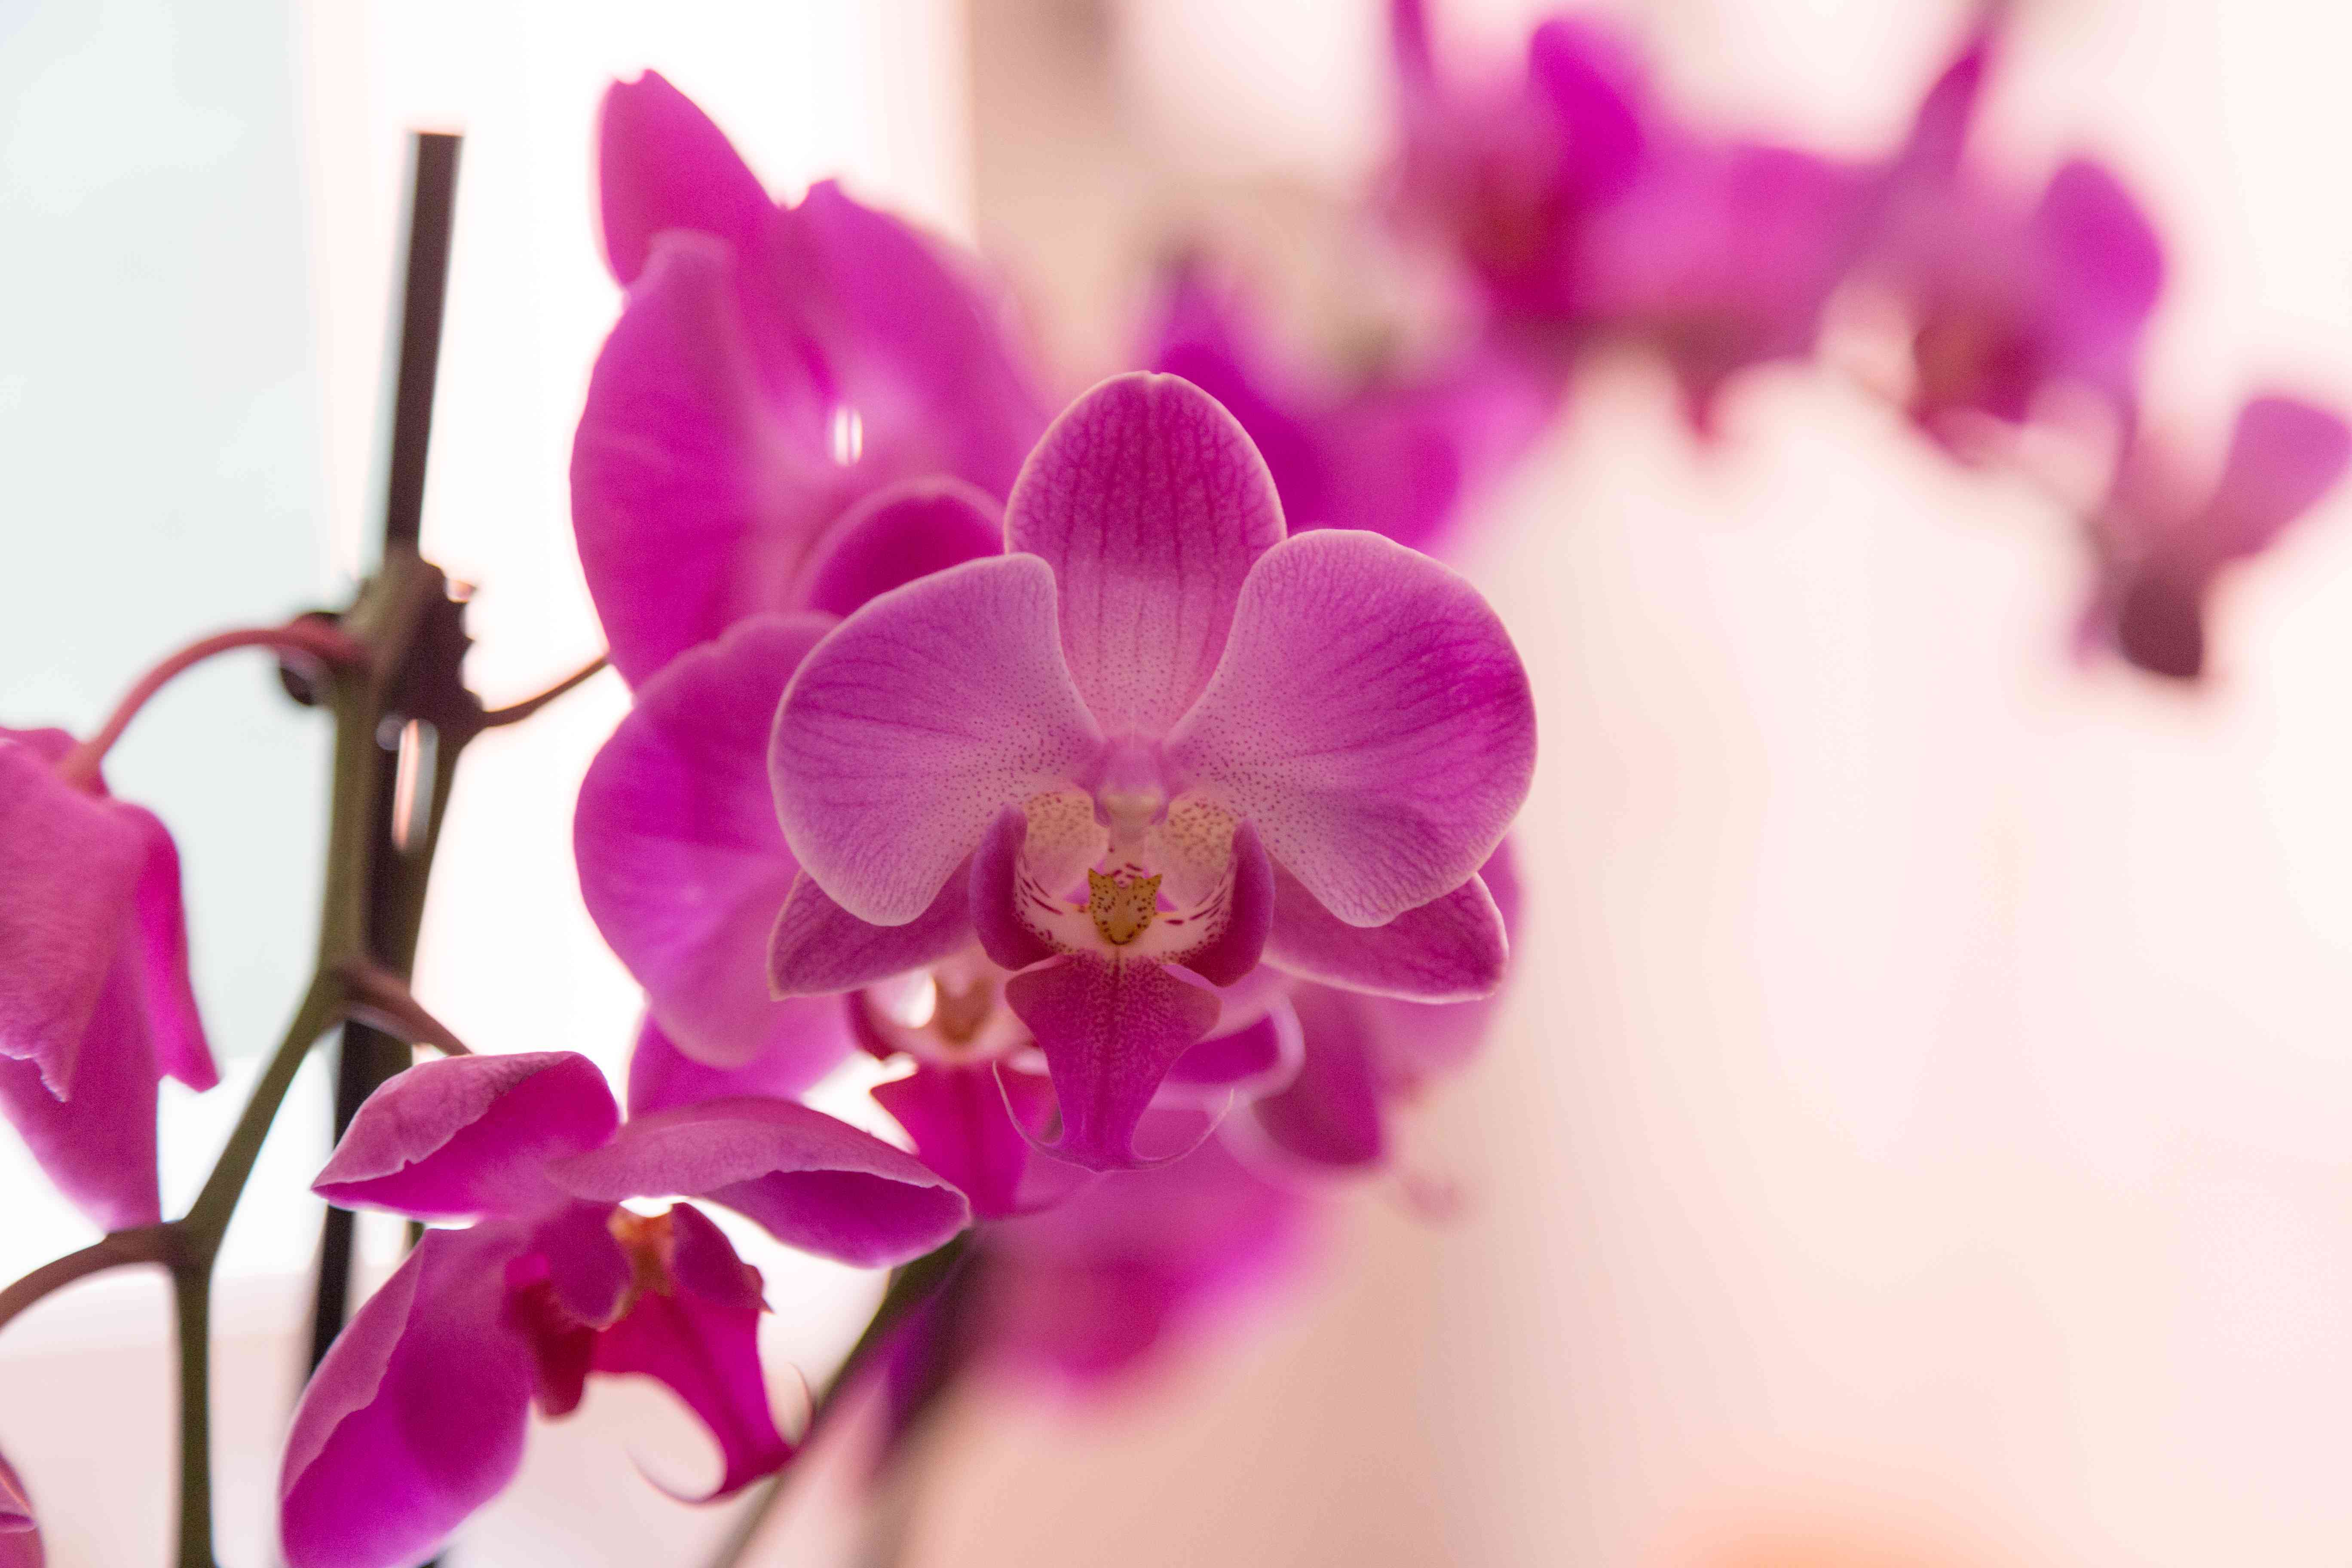 Purple orchids, Violet orchids. Orchid is queen of flowers